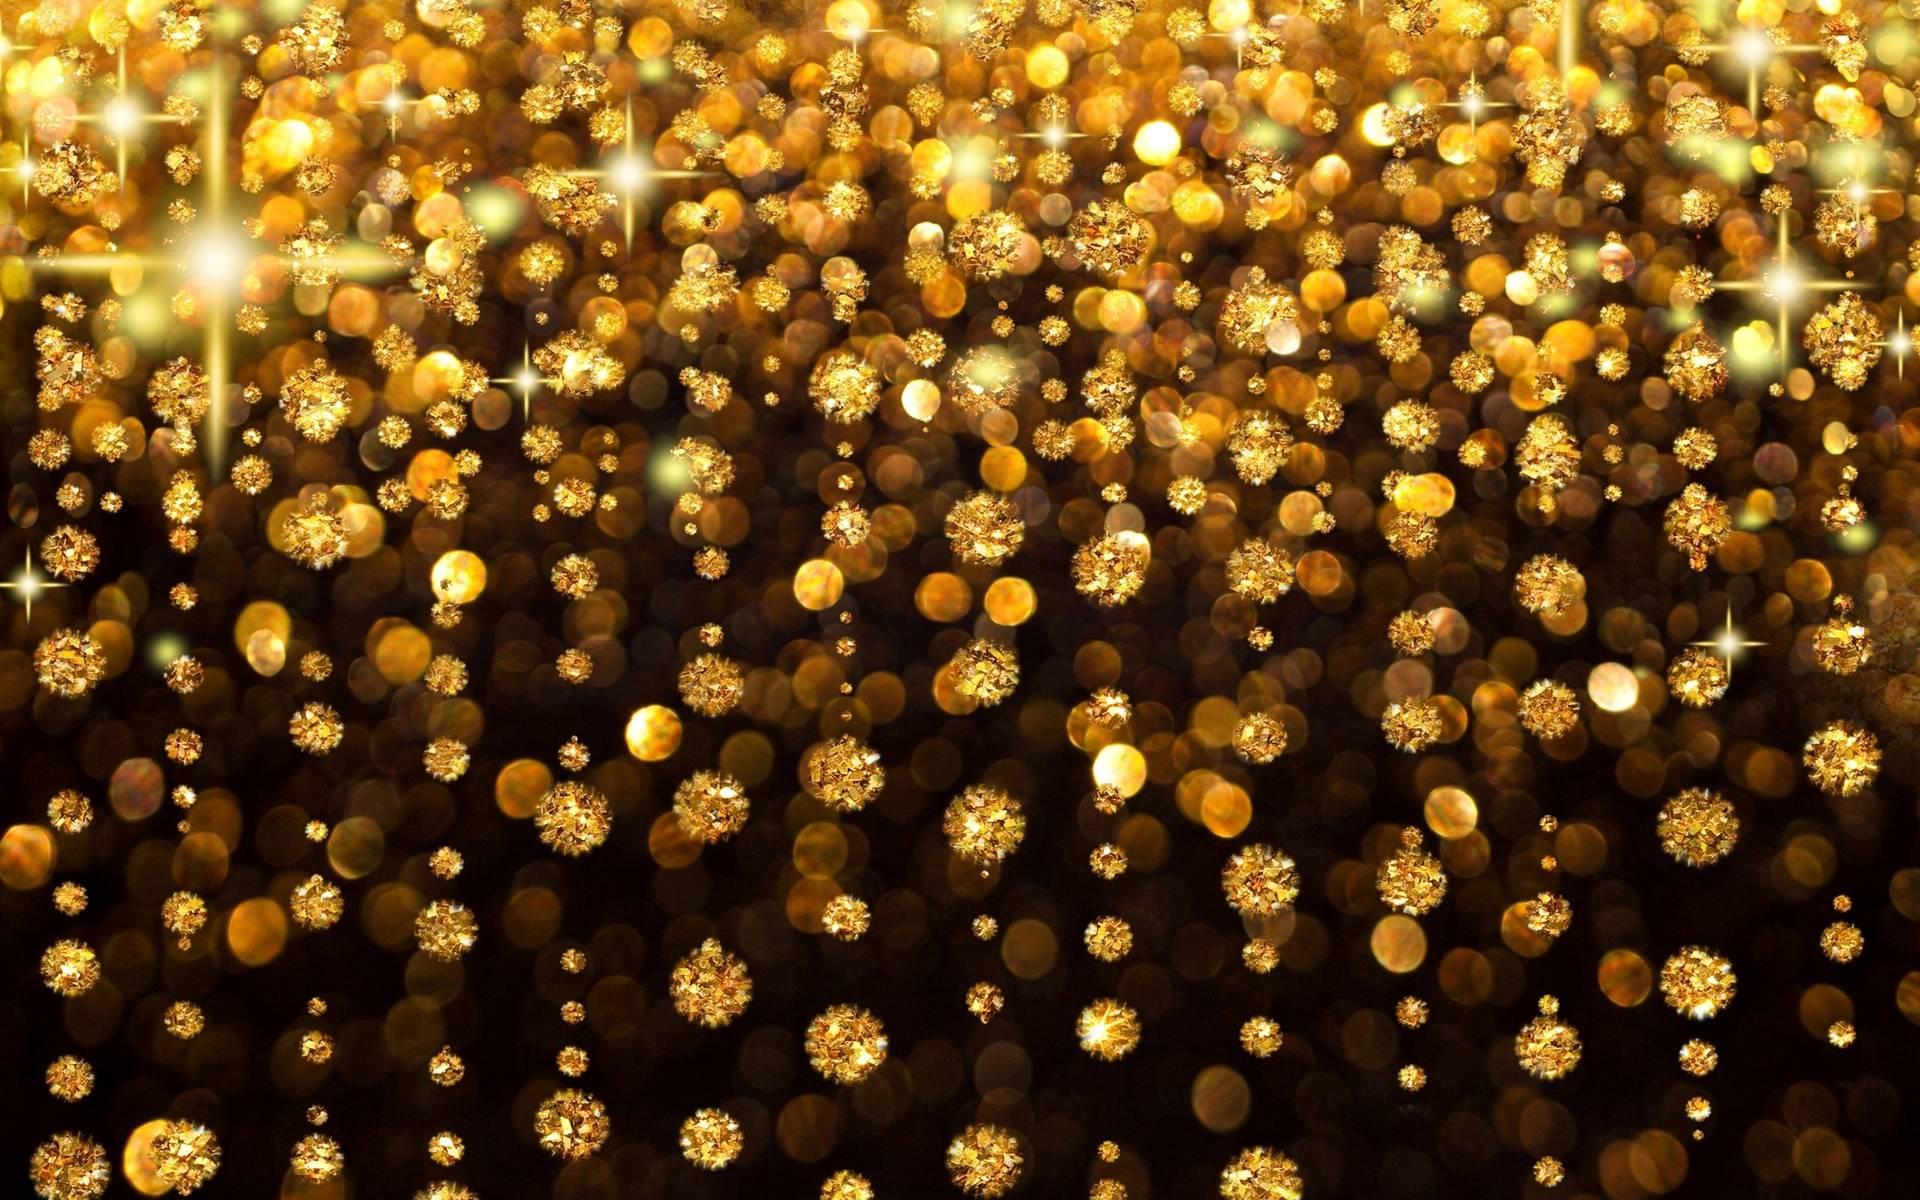 1920 x 1200 · jpeg - Gold Backgrounds Image - Wallpaper Cave